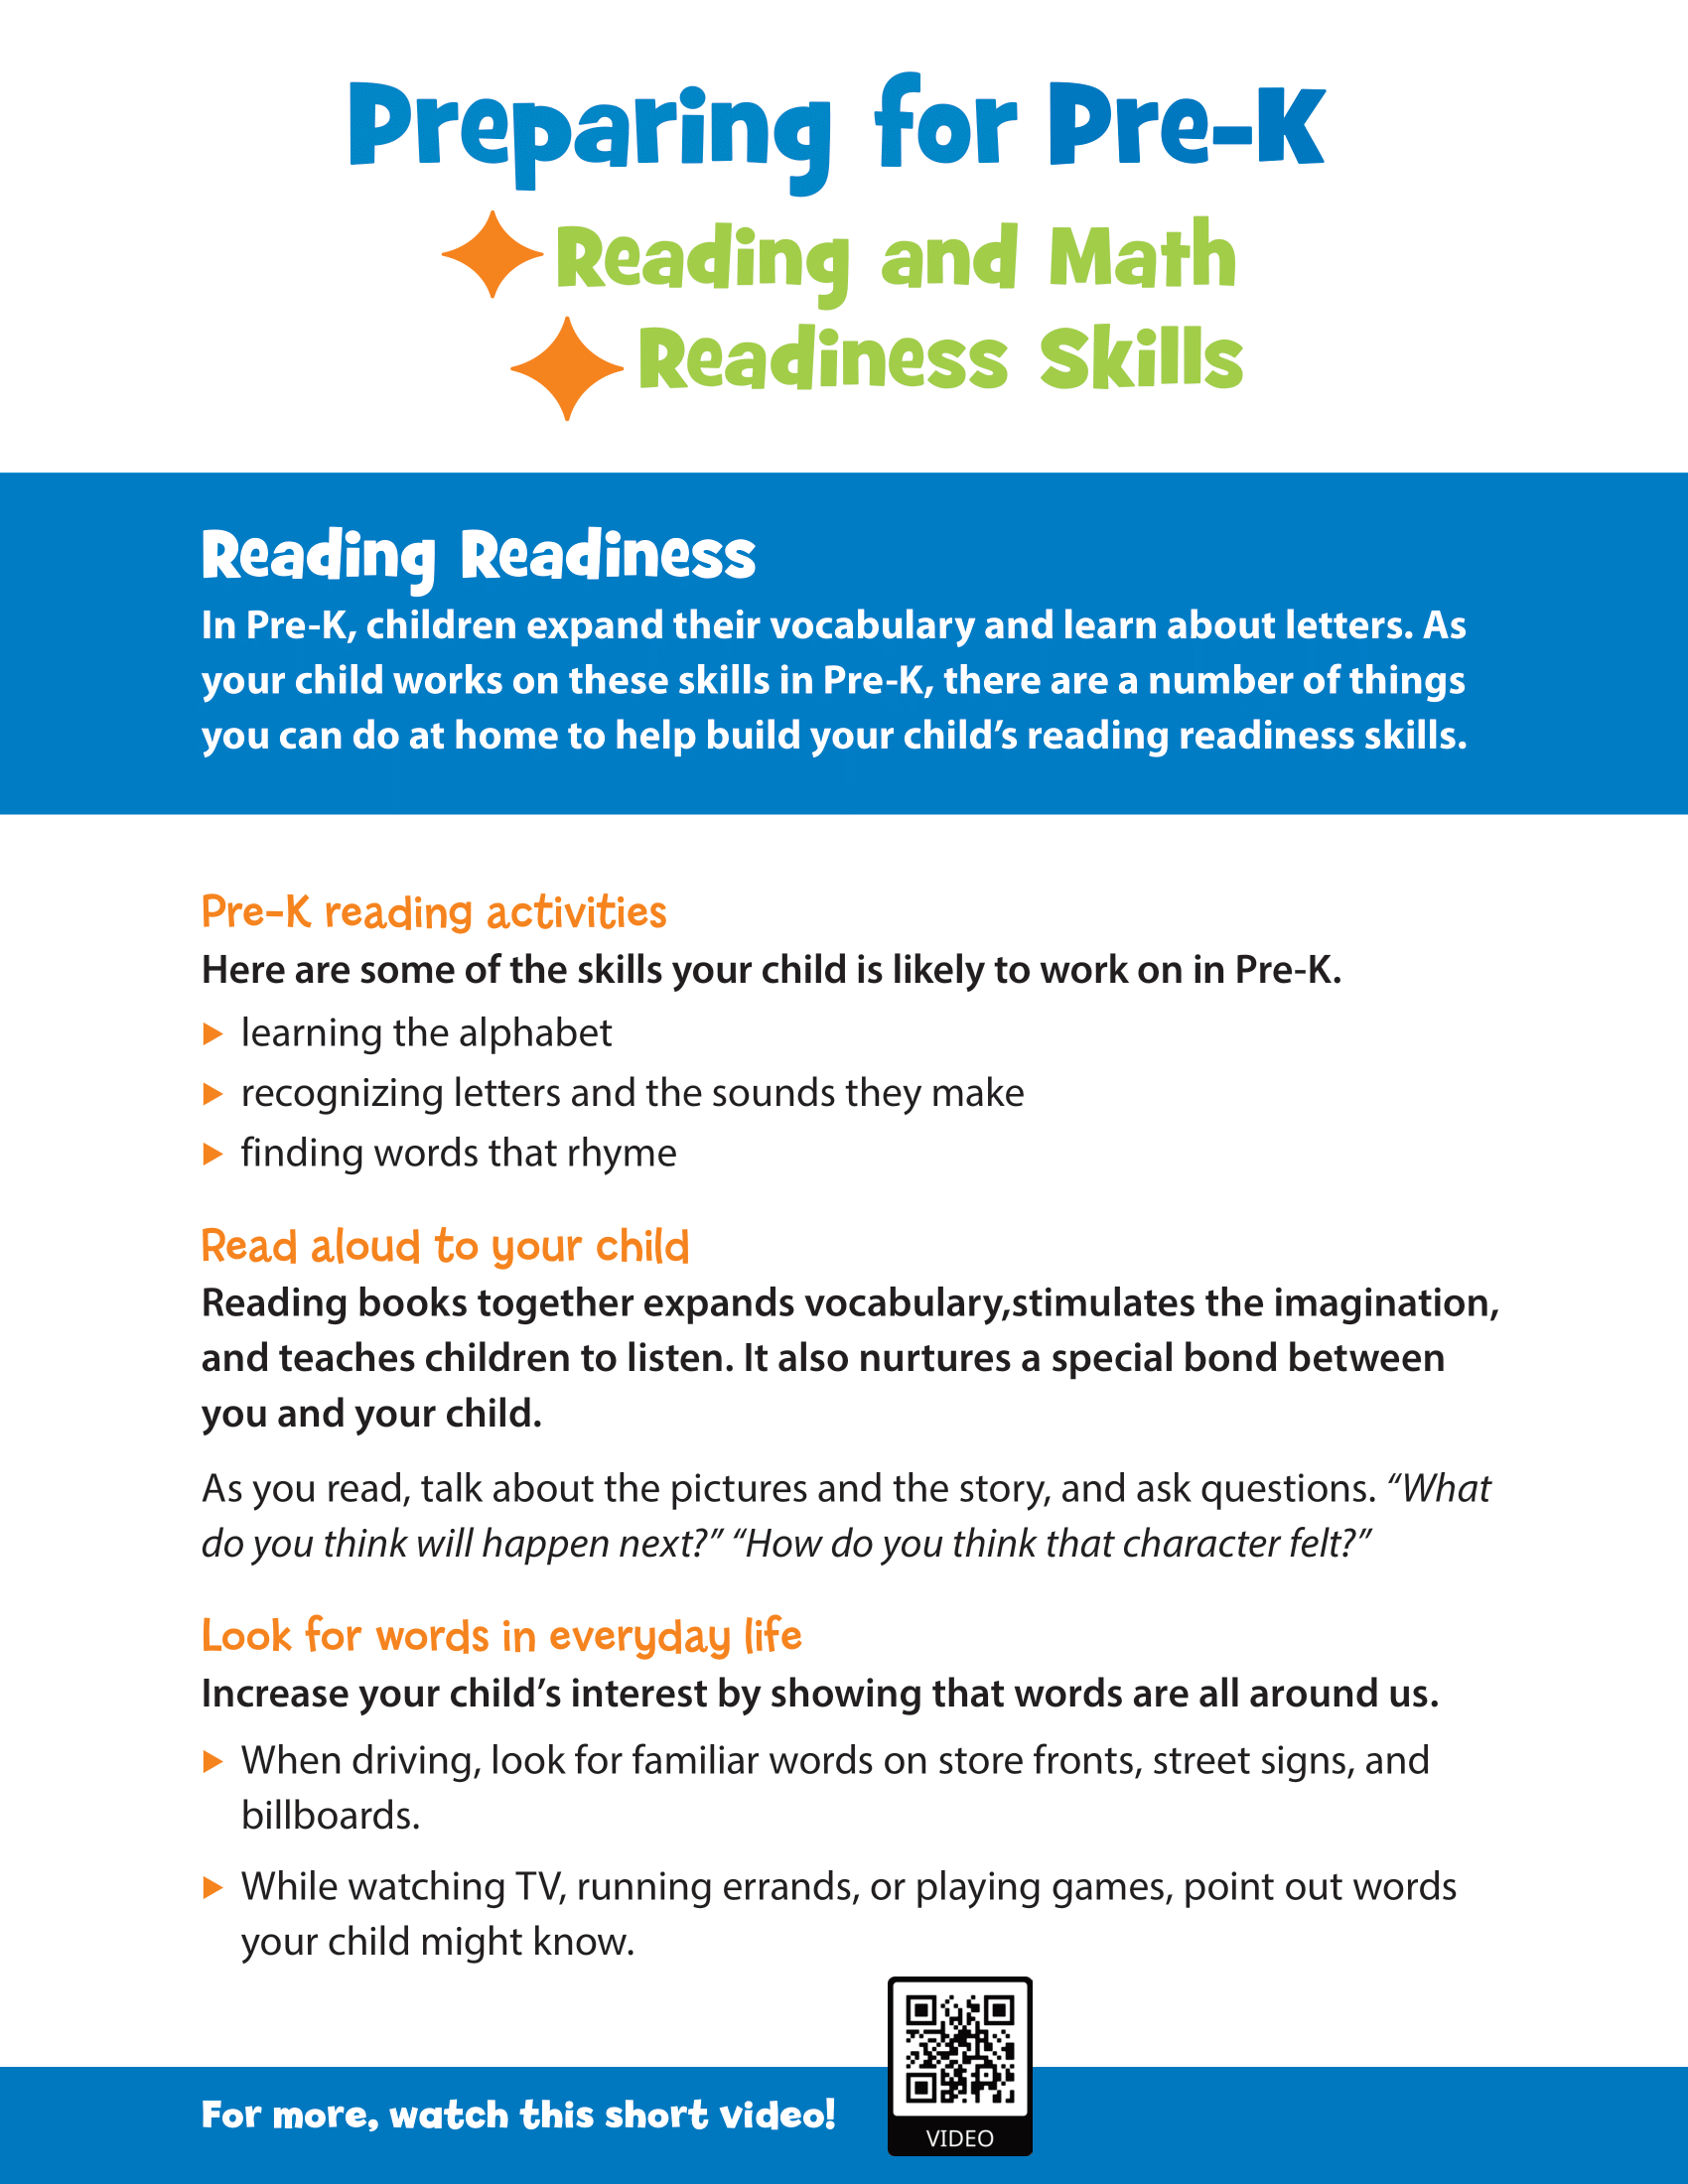 Preparing for Pre-K - Math and Reading